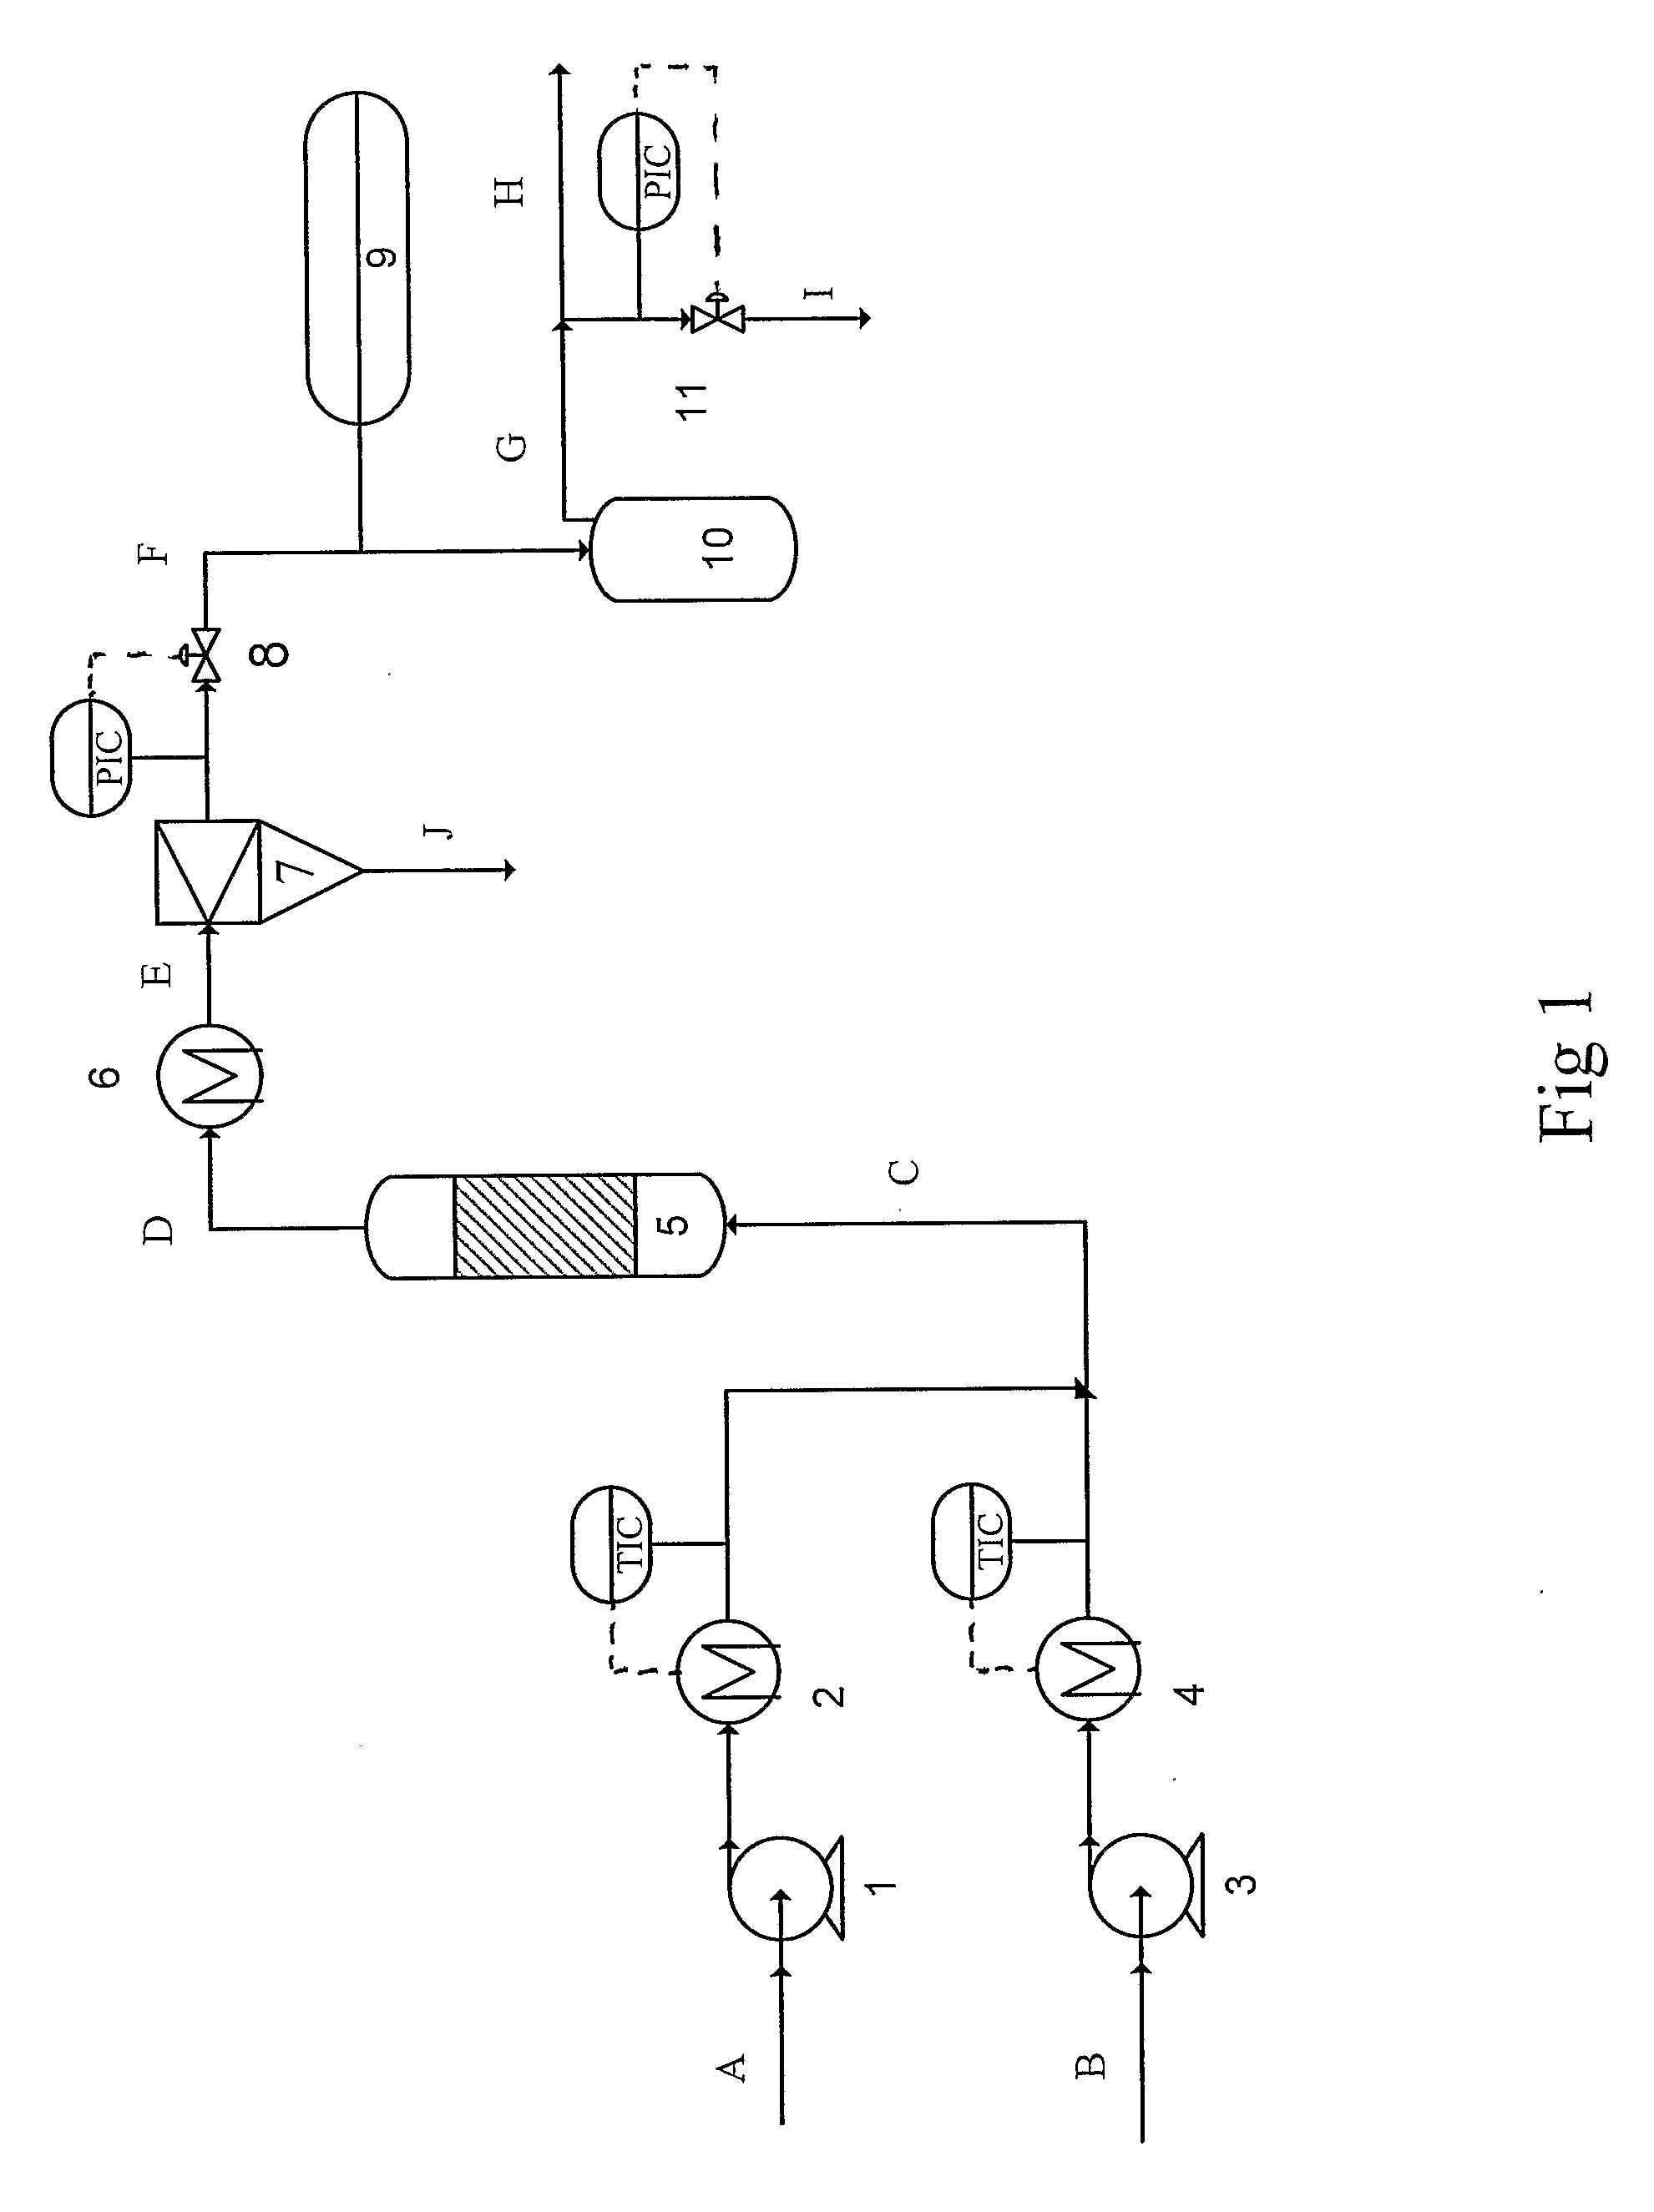 Method and apparatus for converting organic material